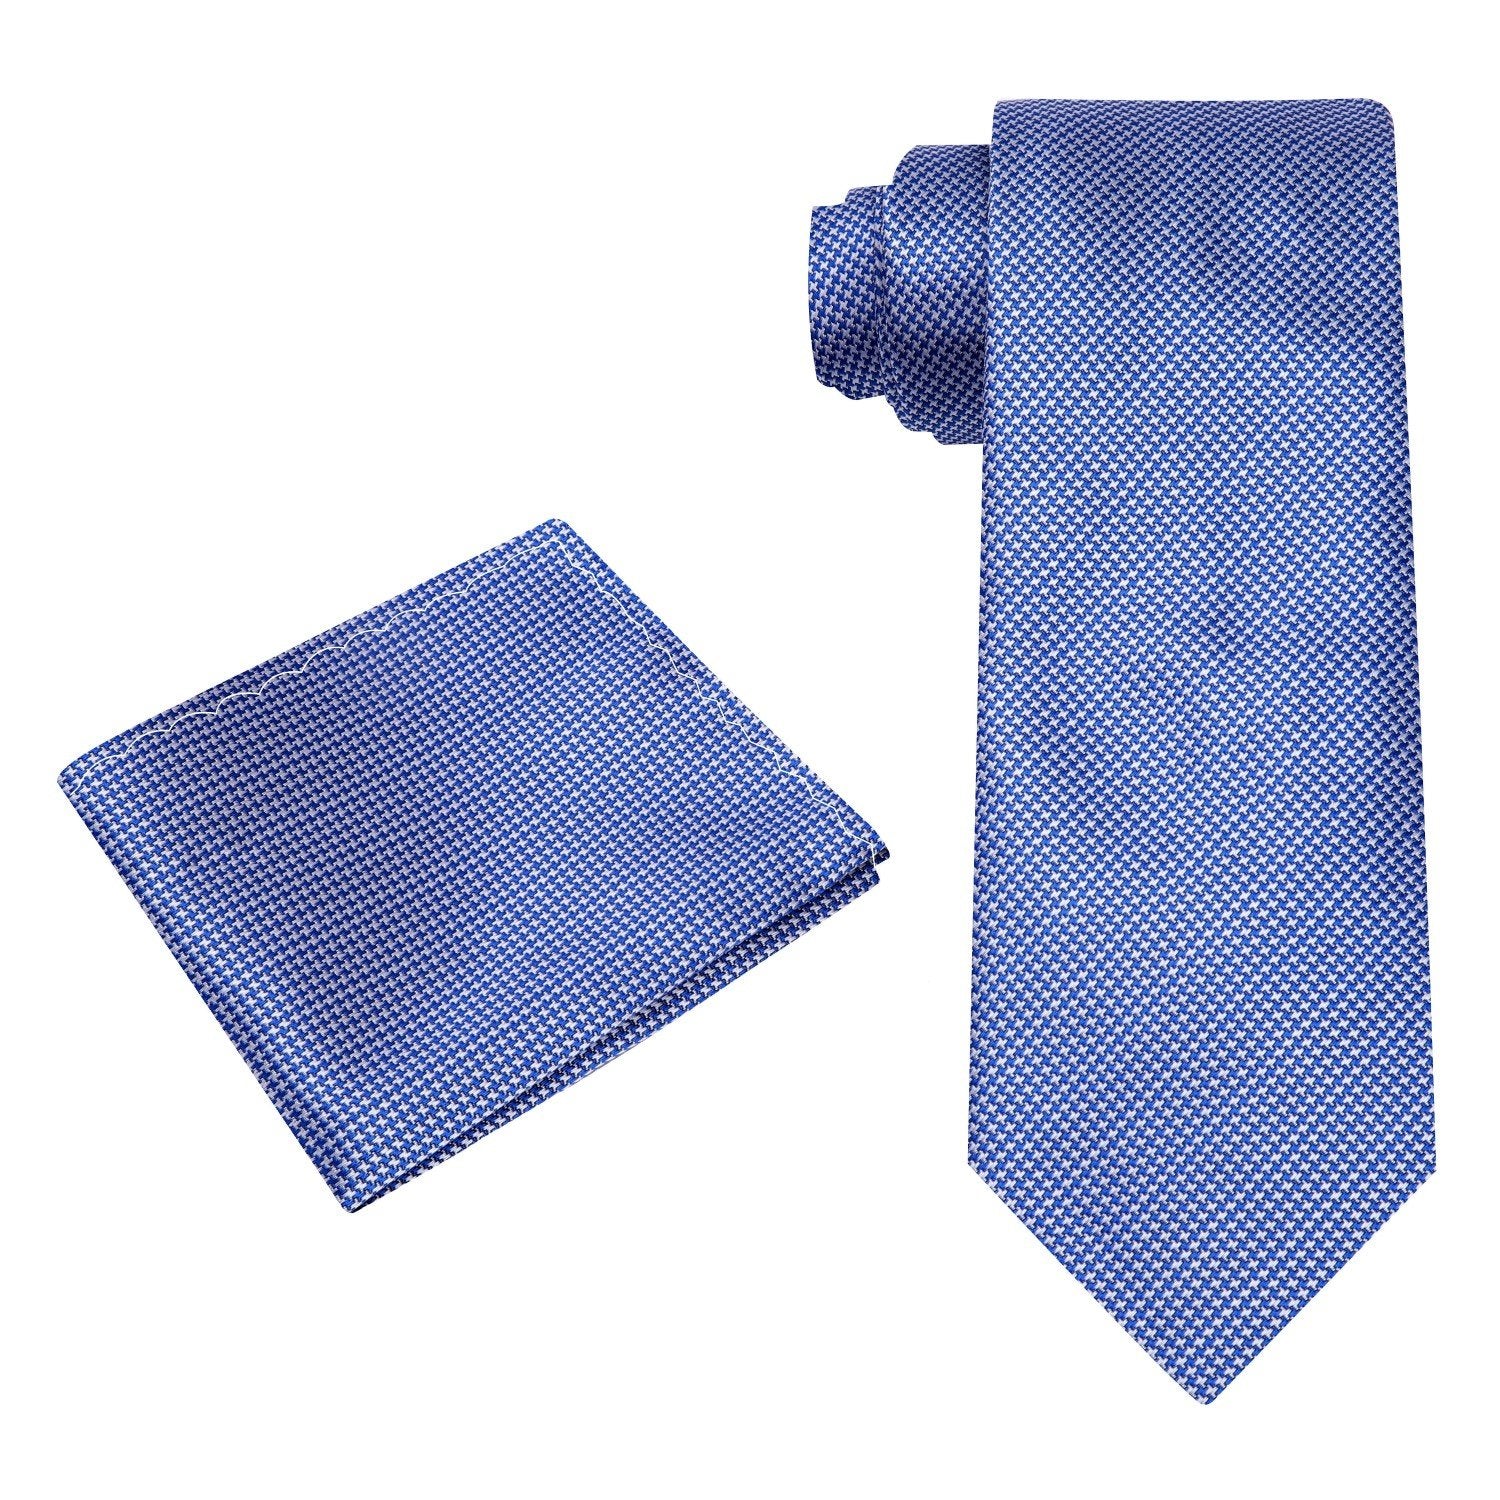 Alt View: Blue, White Hound's-tooth Tie and Square